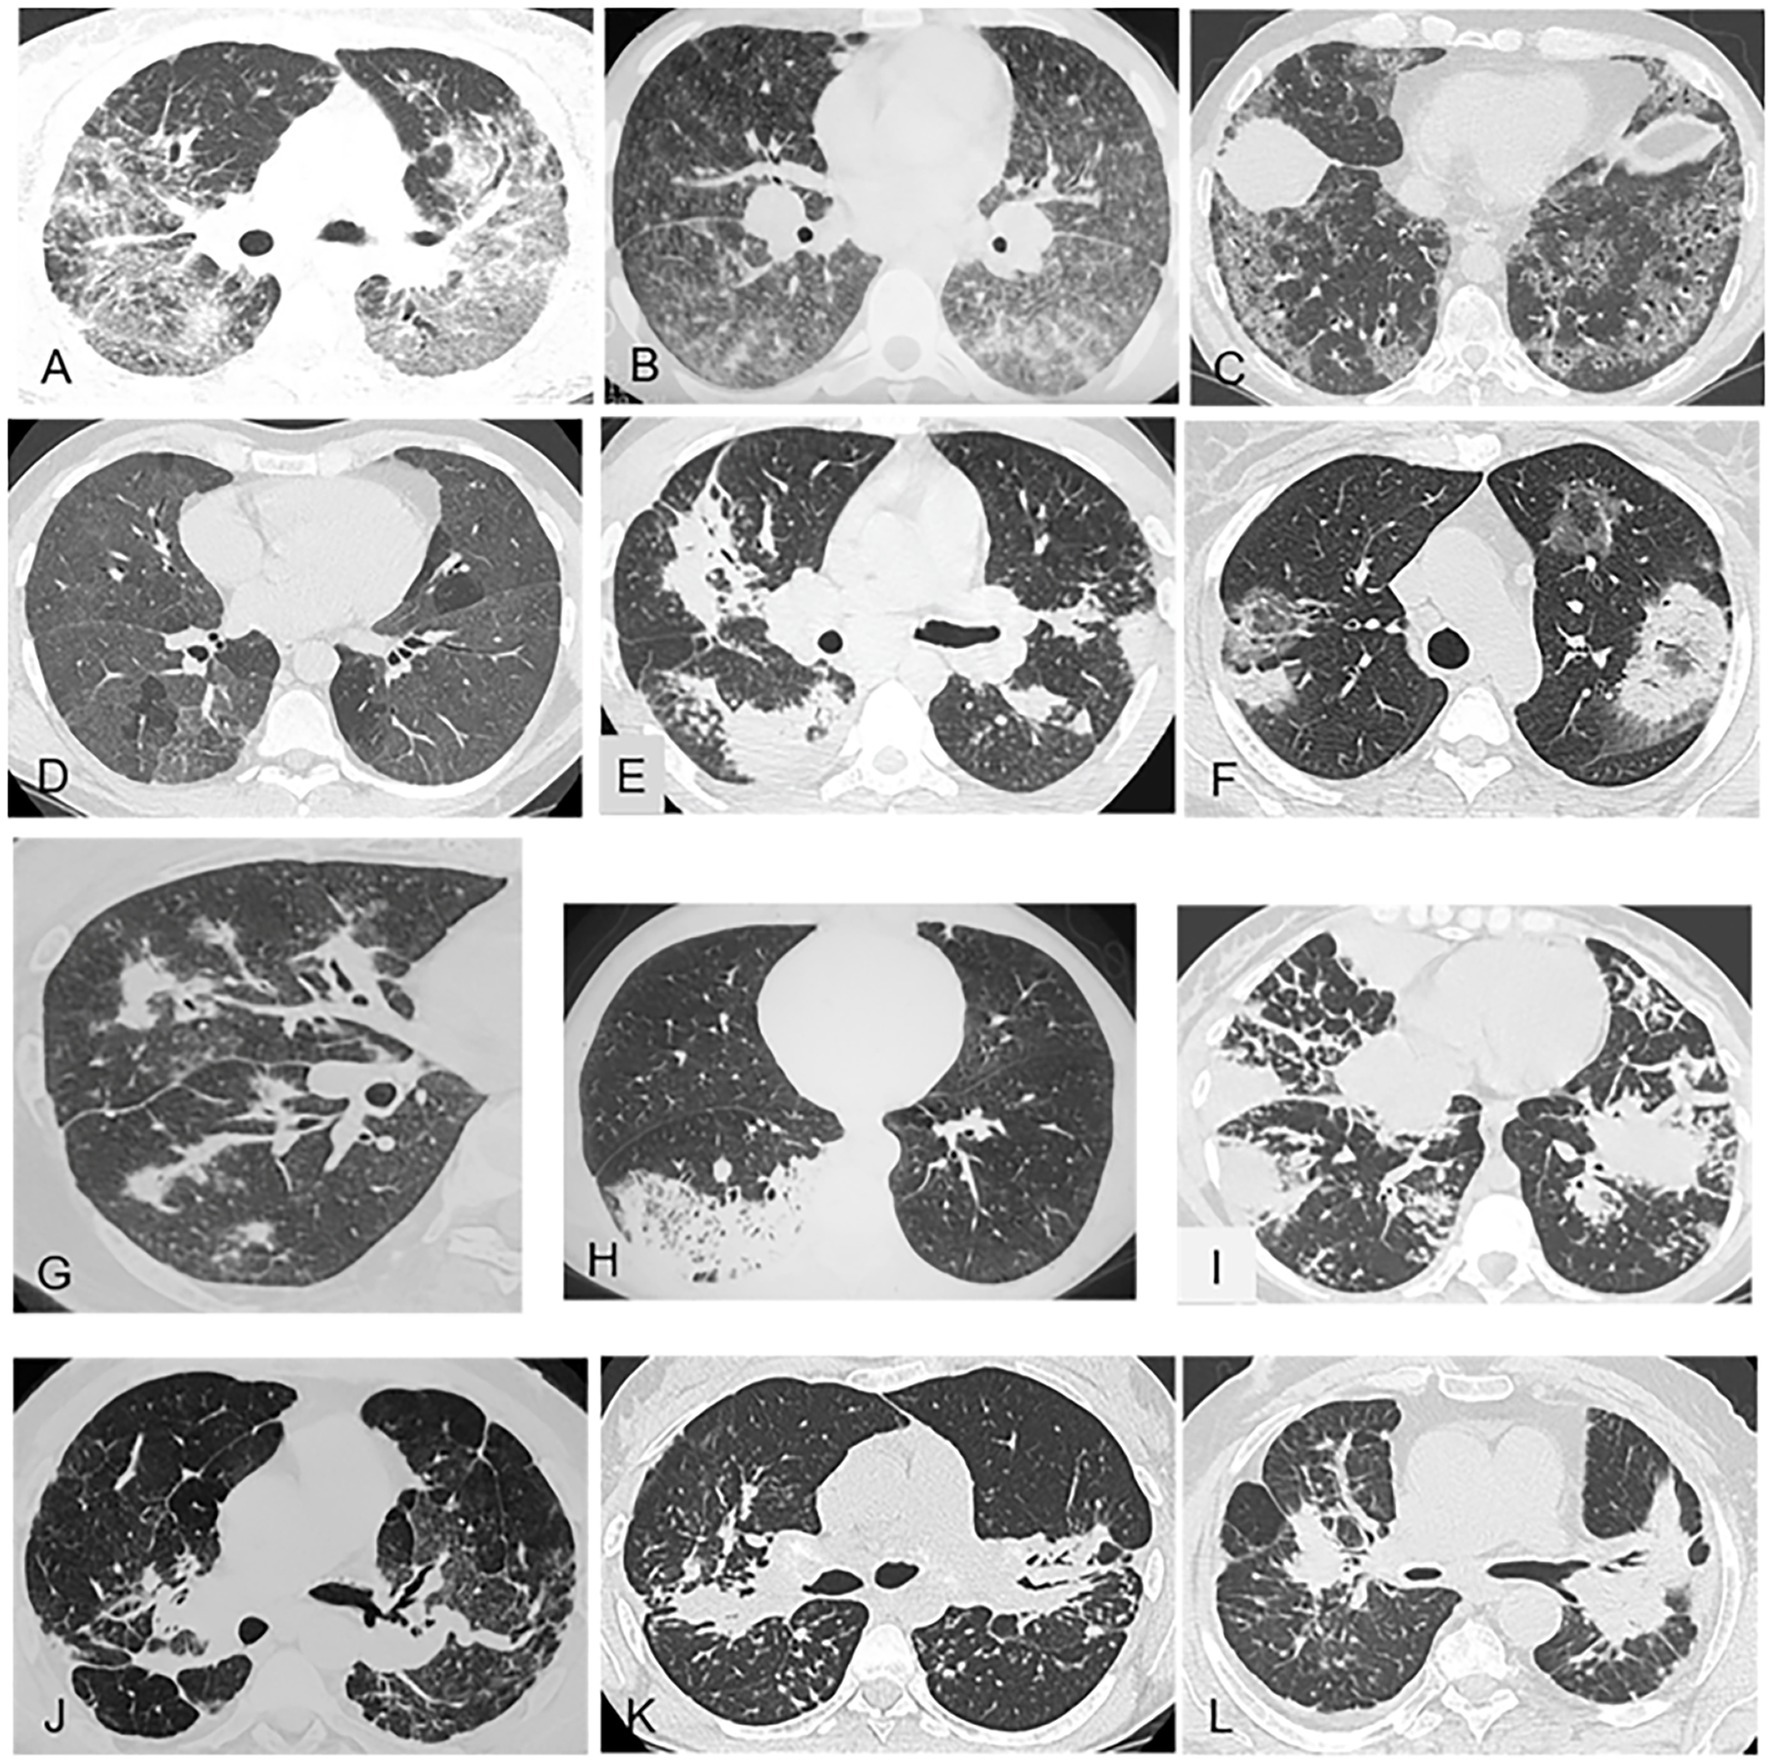 Pulmonary nodules in African migrants caused by chronic